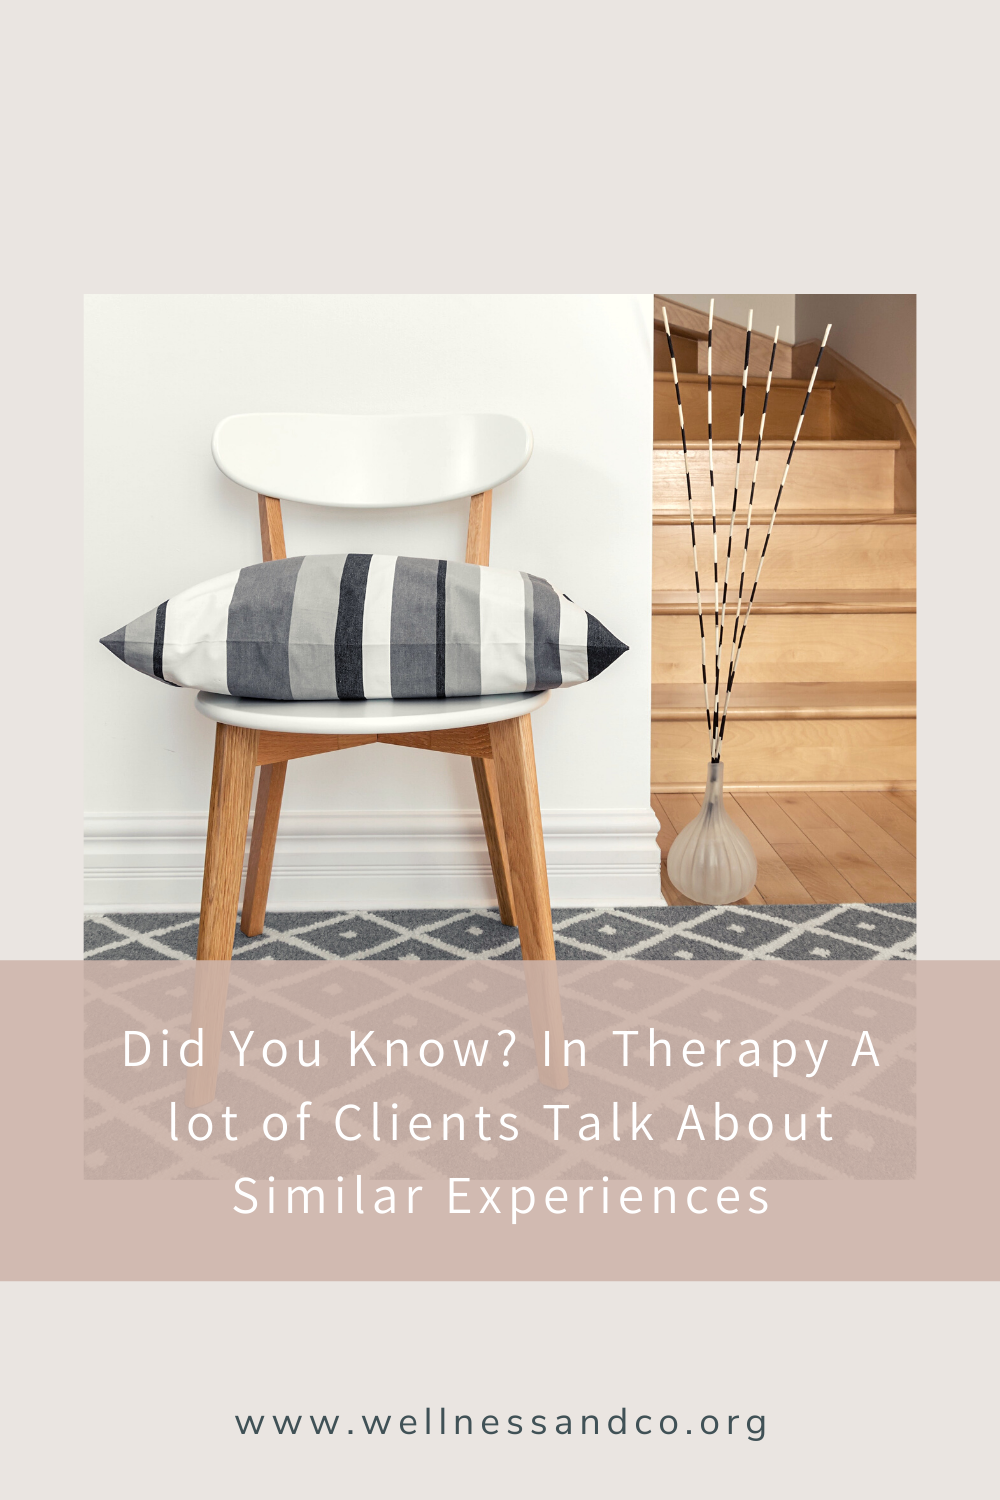 Did You Know? In Therapy A lot of Clients Talk About Similar Experiences | This post explores, in poem form, how clients often come to therapy and talk about similar traumas or wounds, particularly during times of cultural movement. Take a look from the eyes of a therapist into a common and disheartening experience many women have.